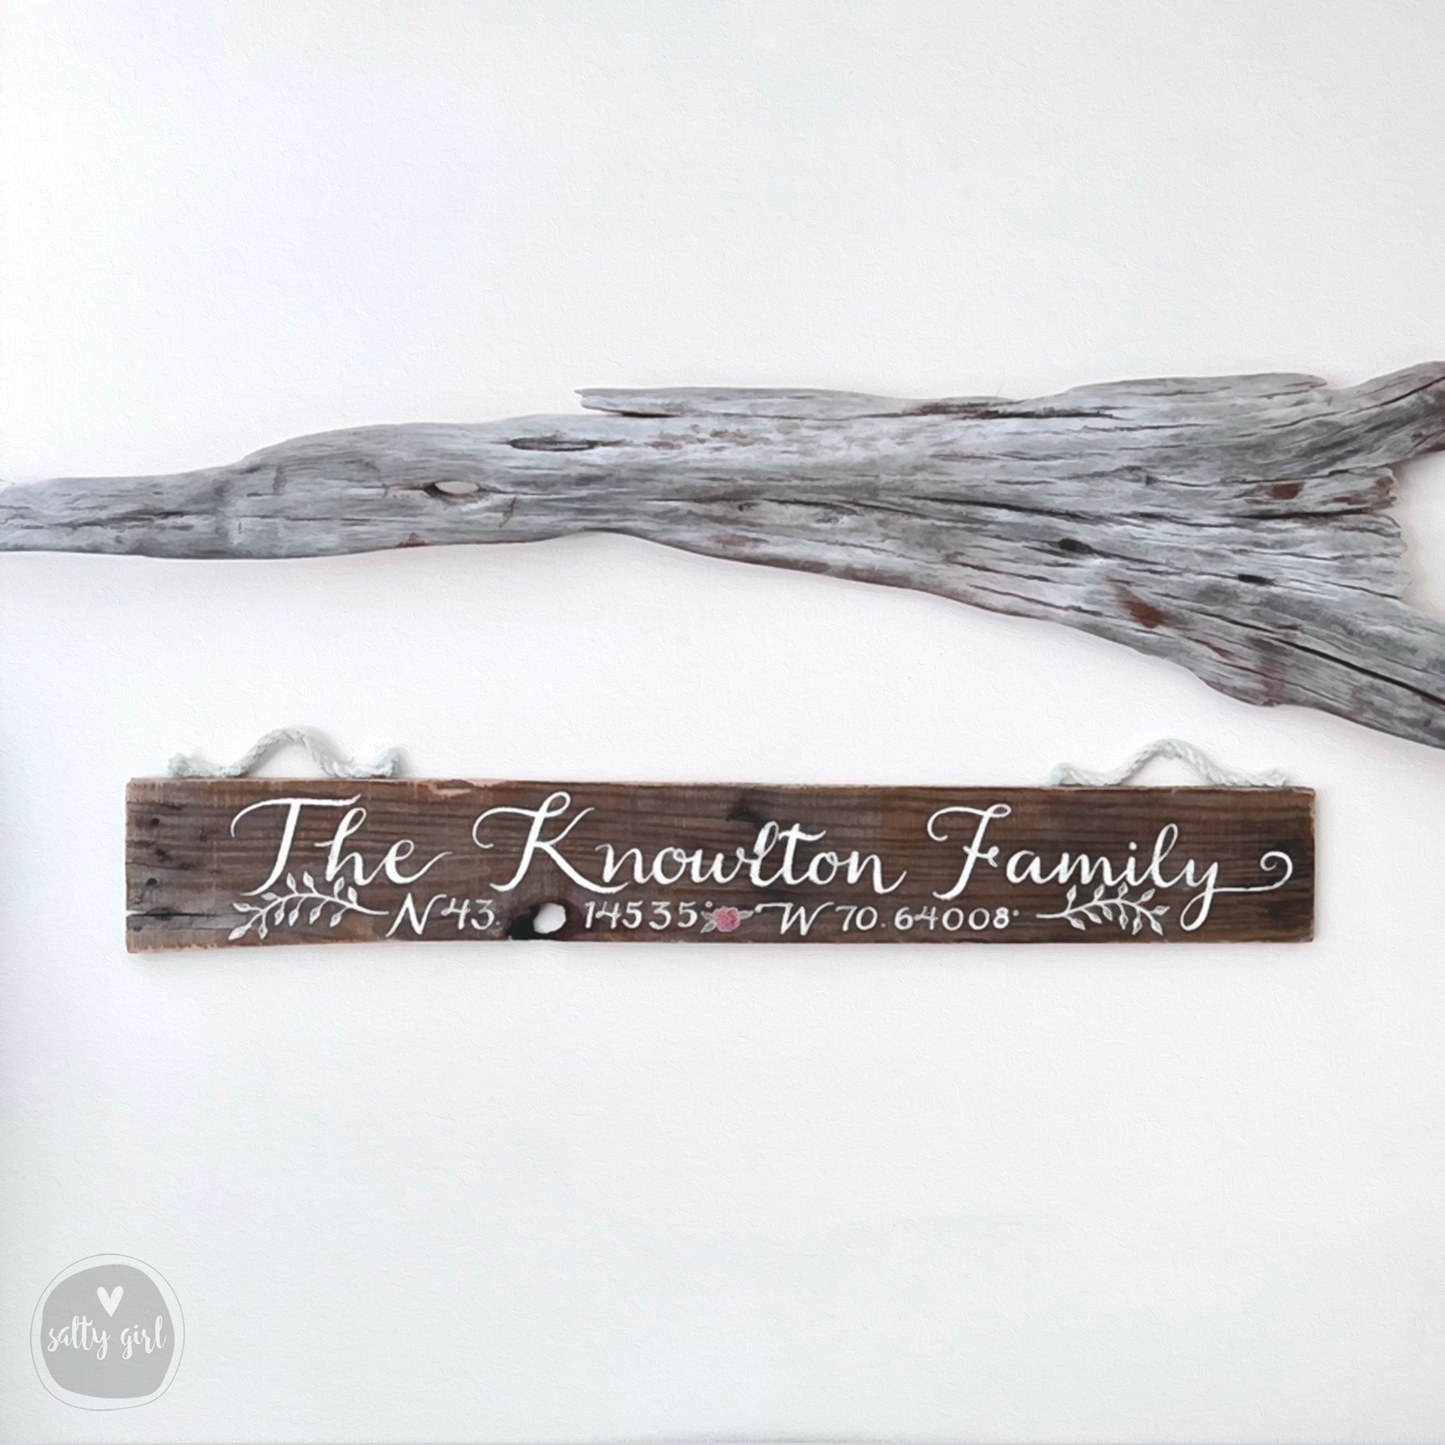 a wooden sign that says, the kronutton family